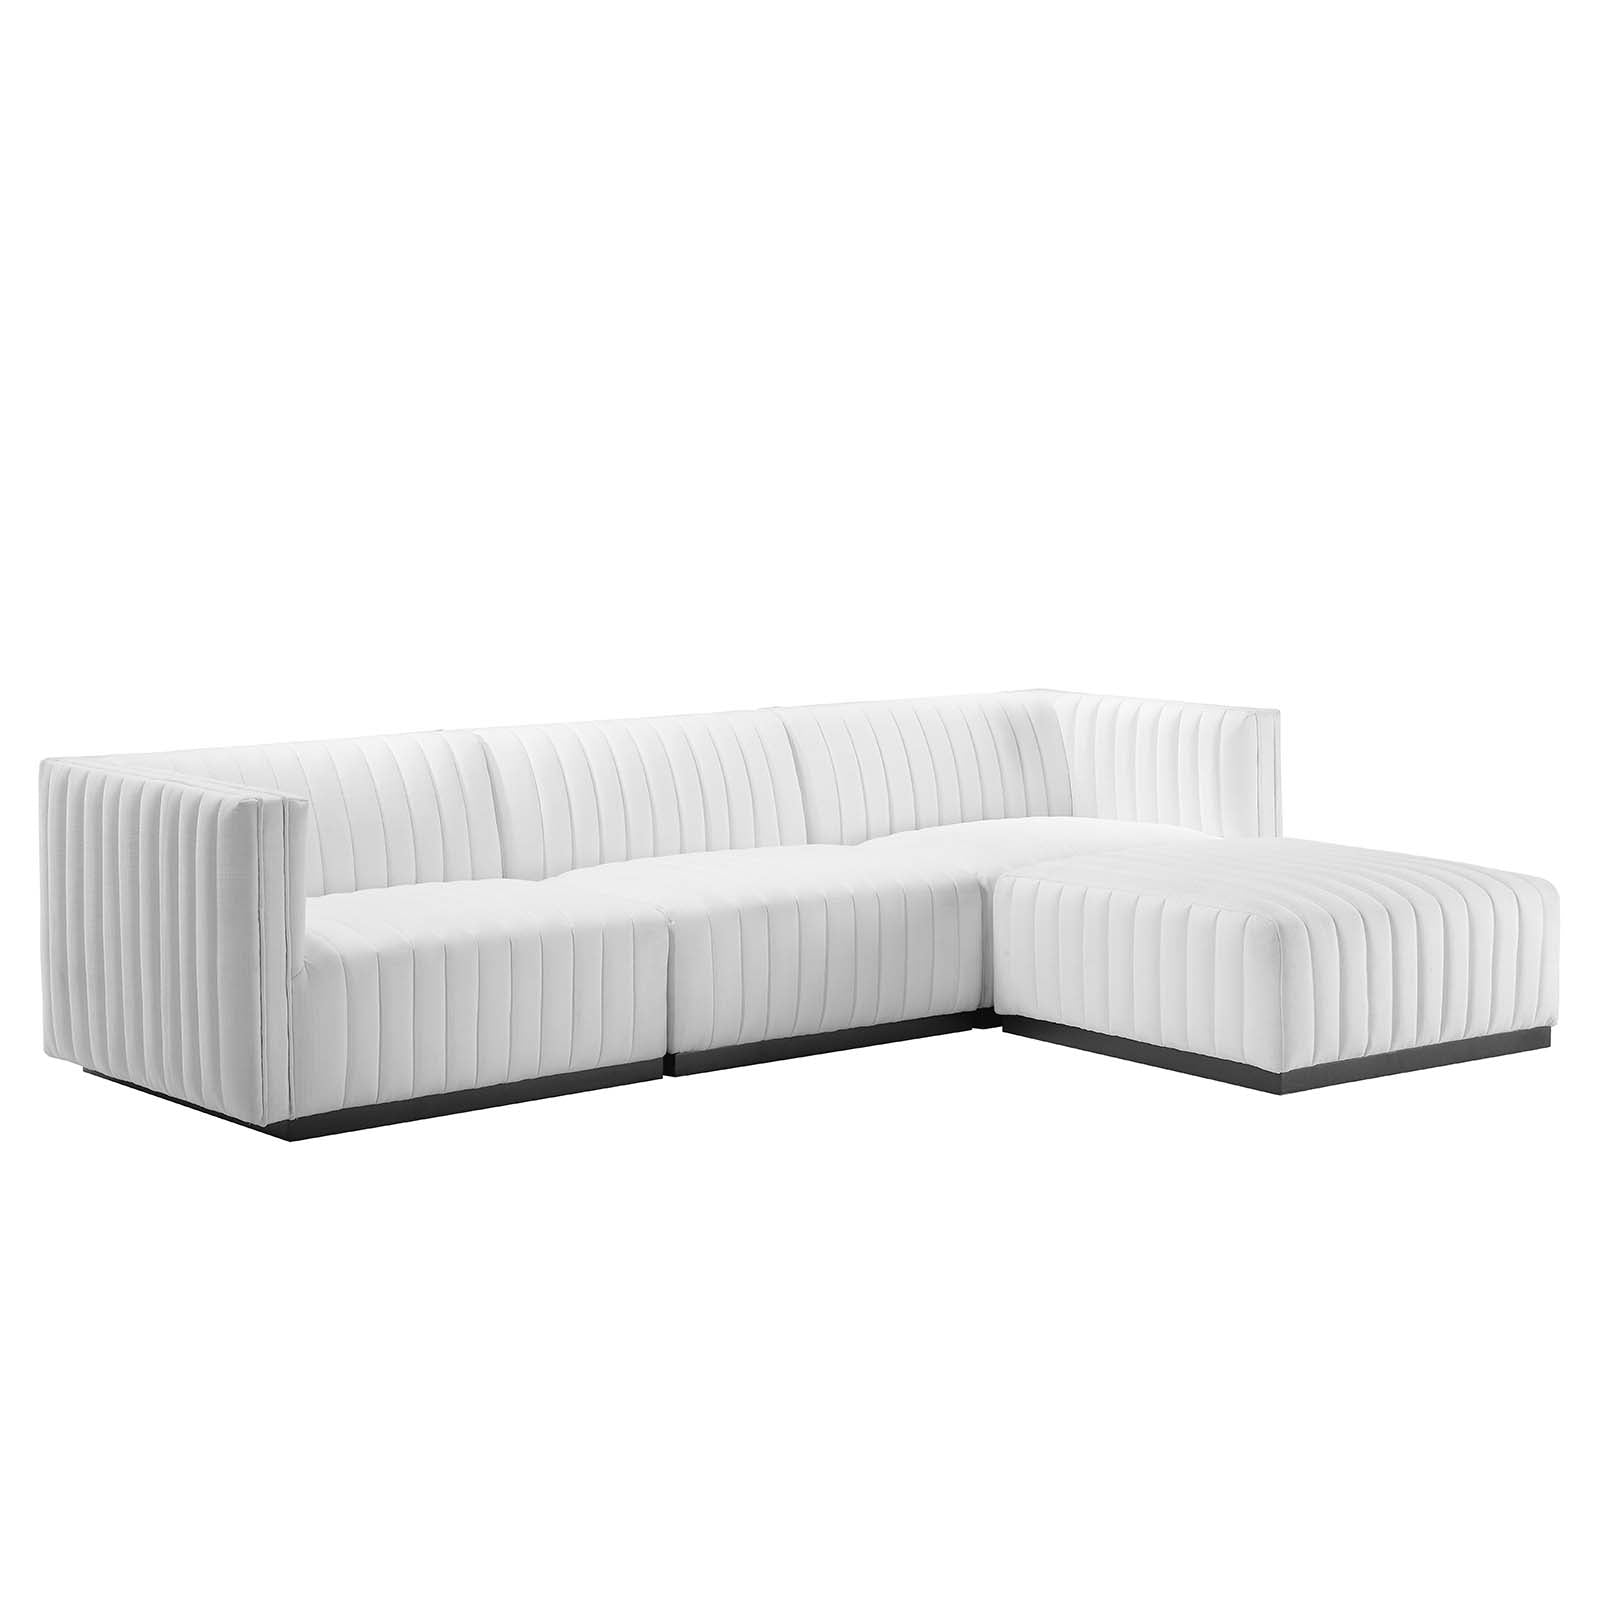 Conjure Channel Tufted Upholstered Fabric 4-Piece Sectional Sofa - East Shore Modern Home Furnishings